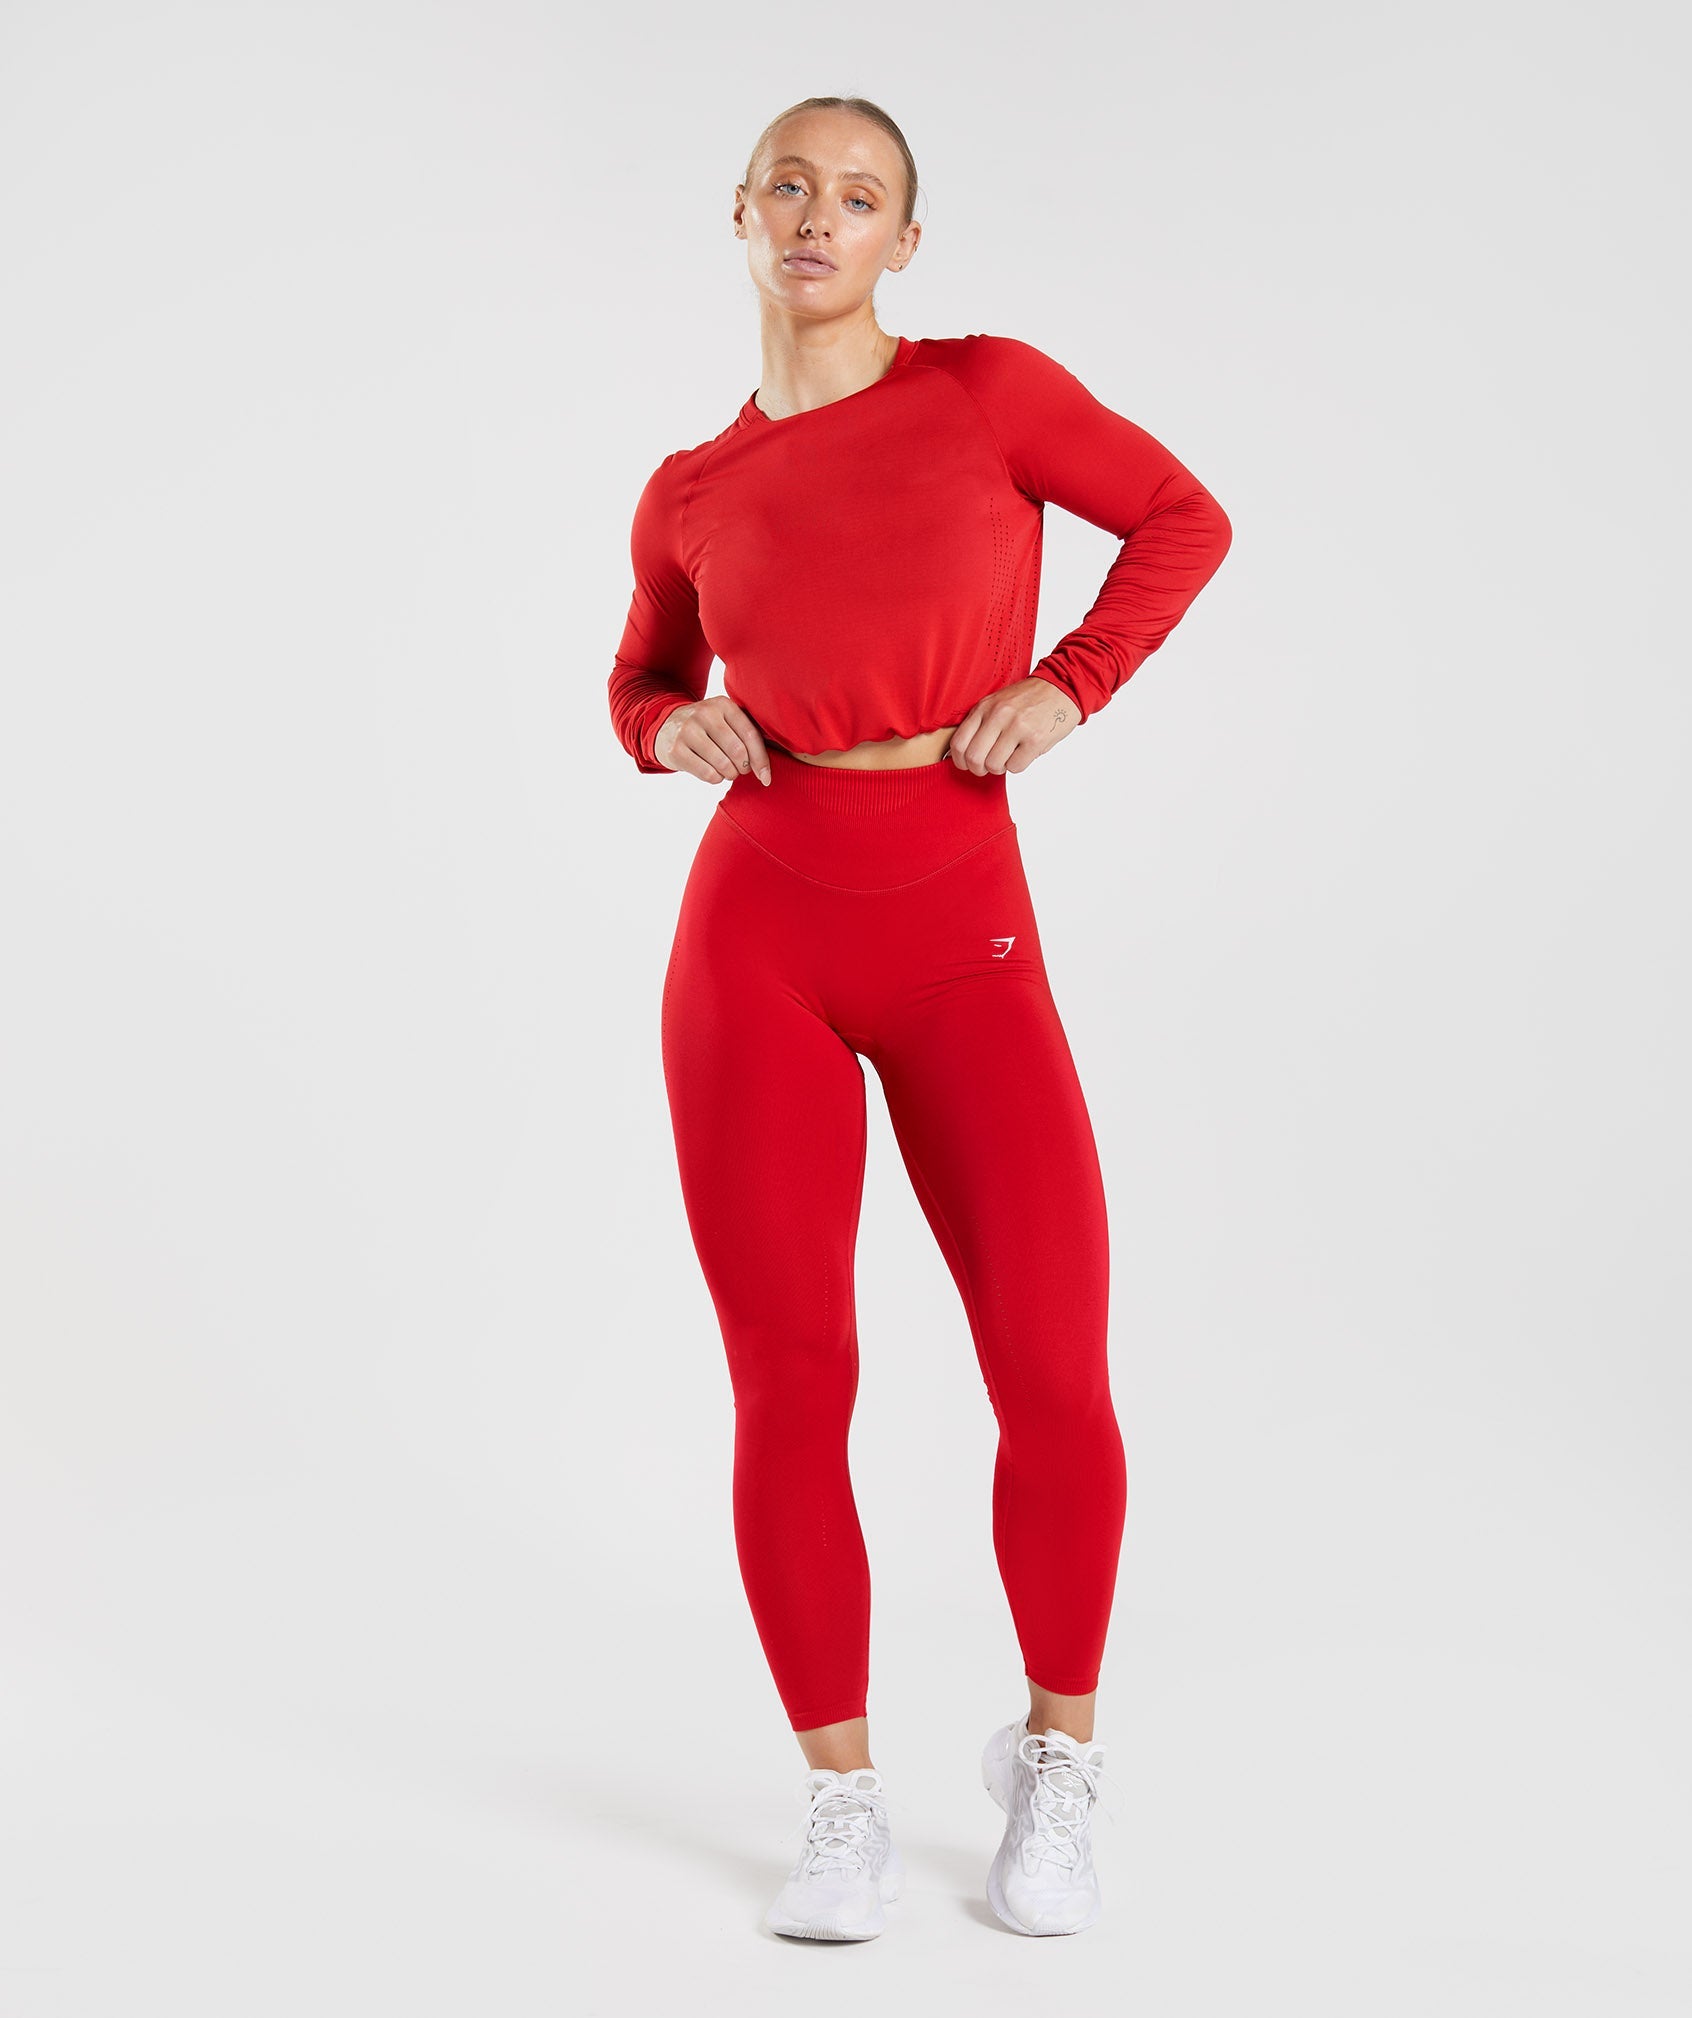 Sweat Seamless Long Sleeve Crop Top in Salsa Red - view 4